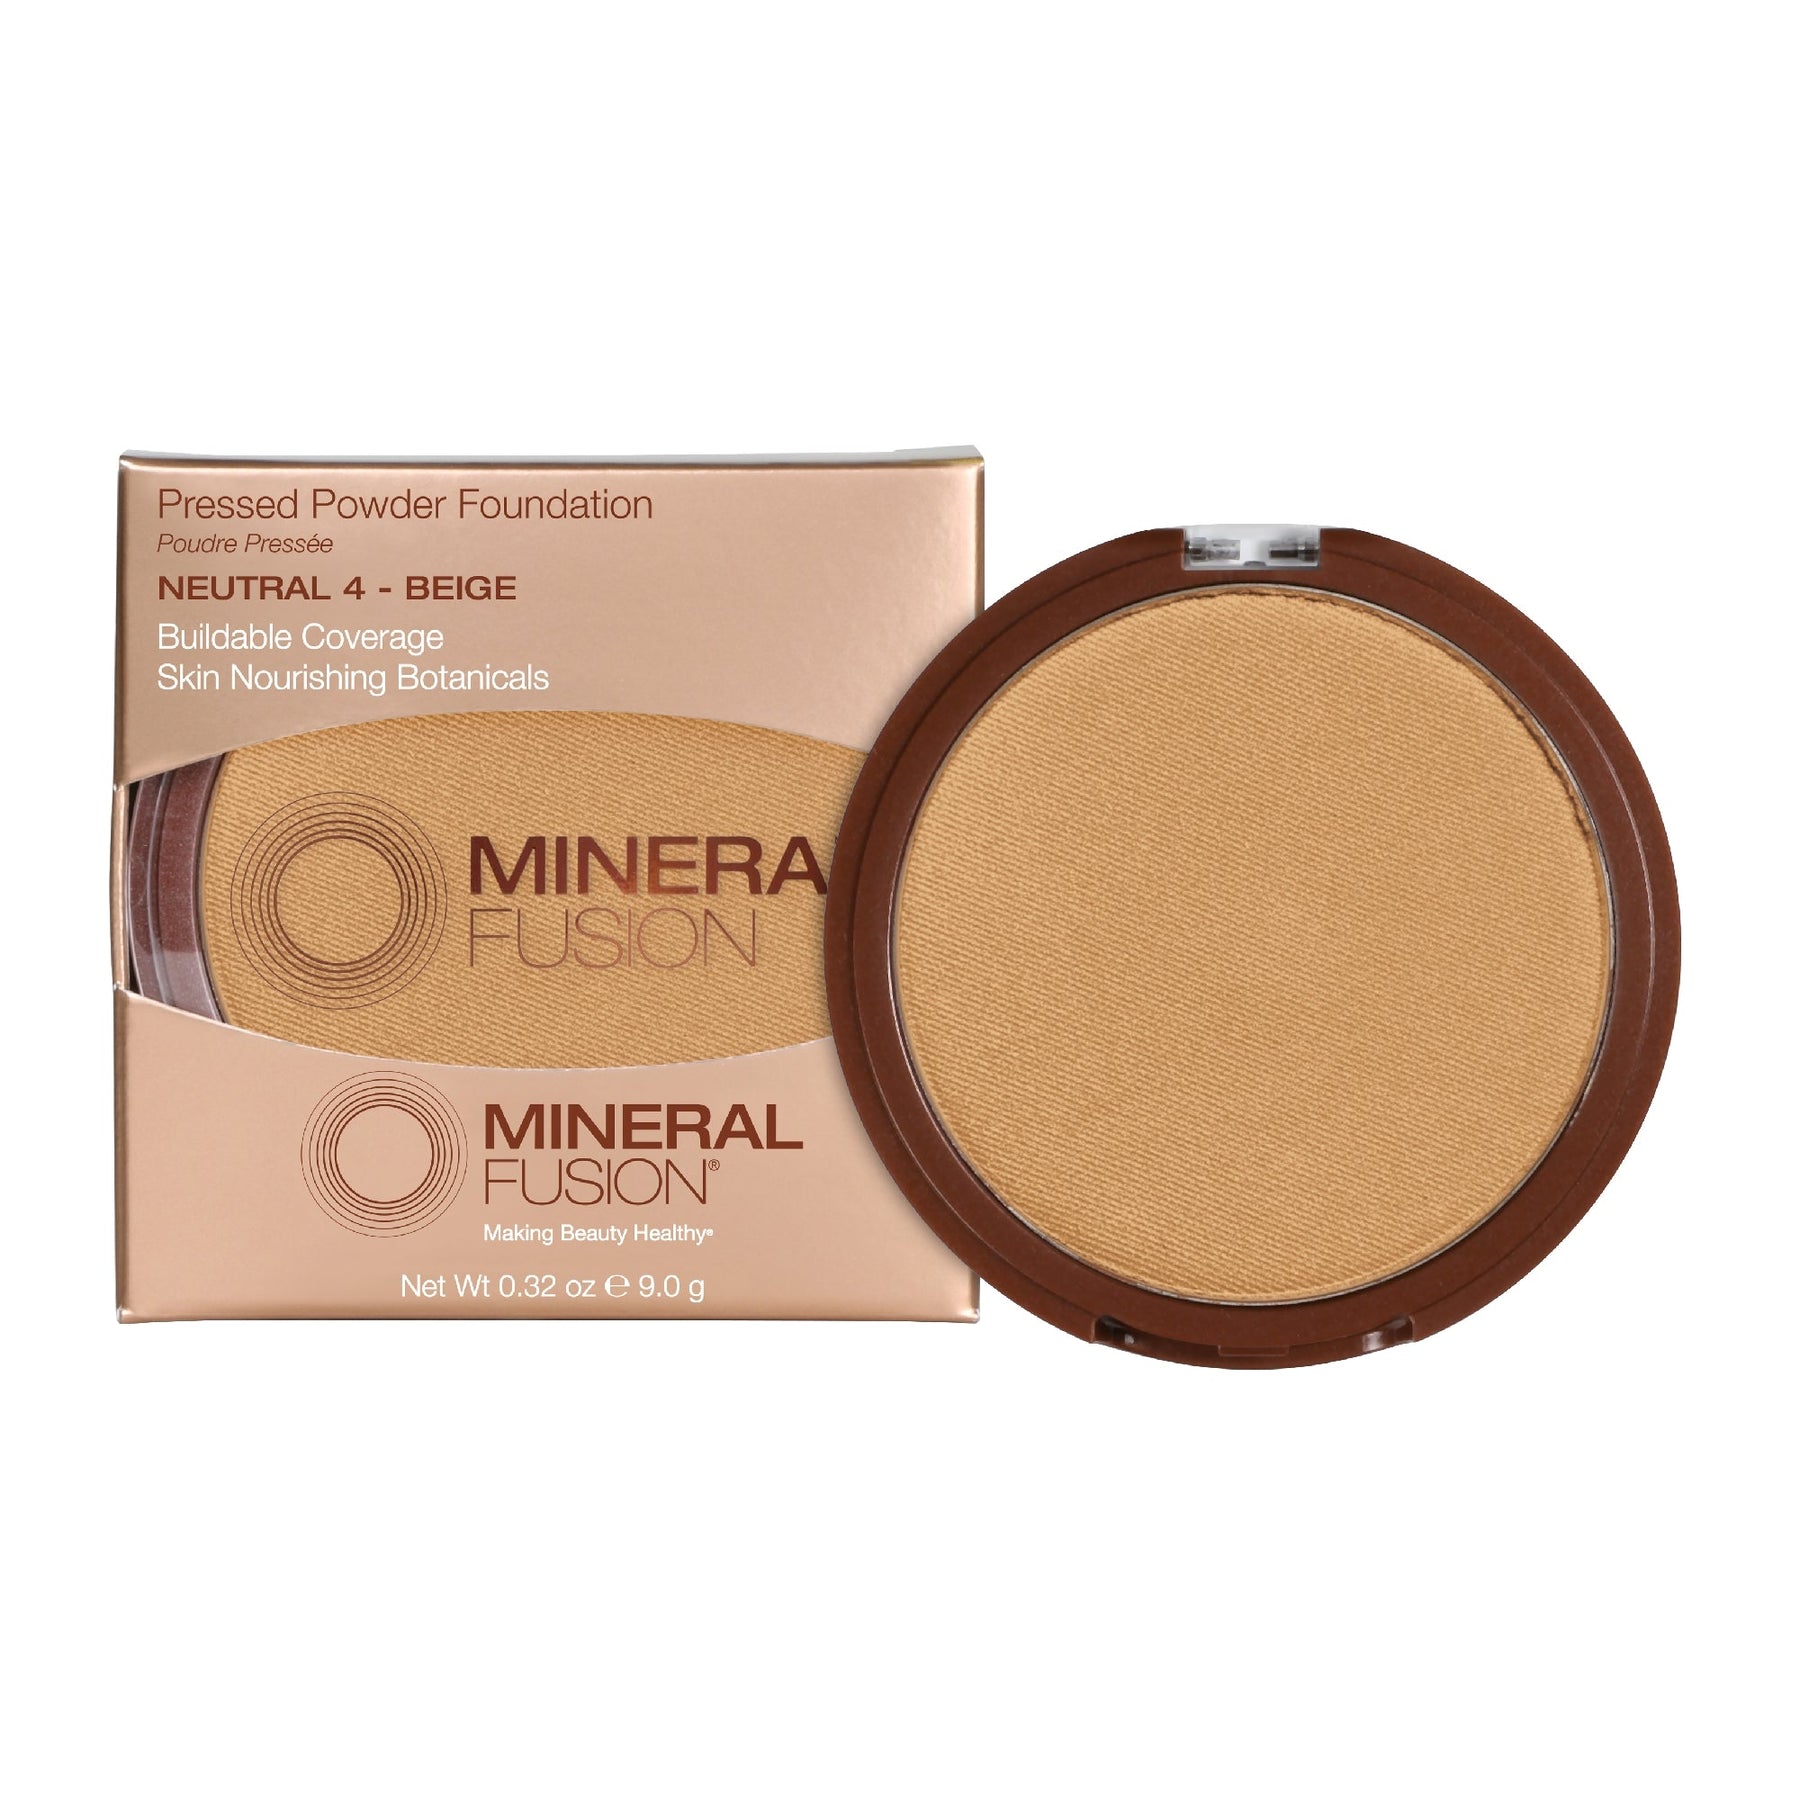 Mineral Fusion - Pressed Powder Foundation - Neutral 4 - Beige / .32 oz - ProCare Outlet by Mineral Fusion